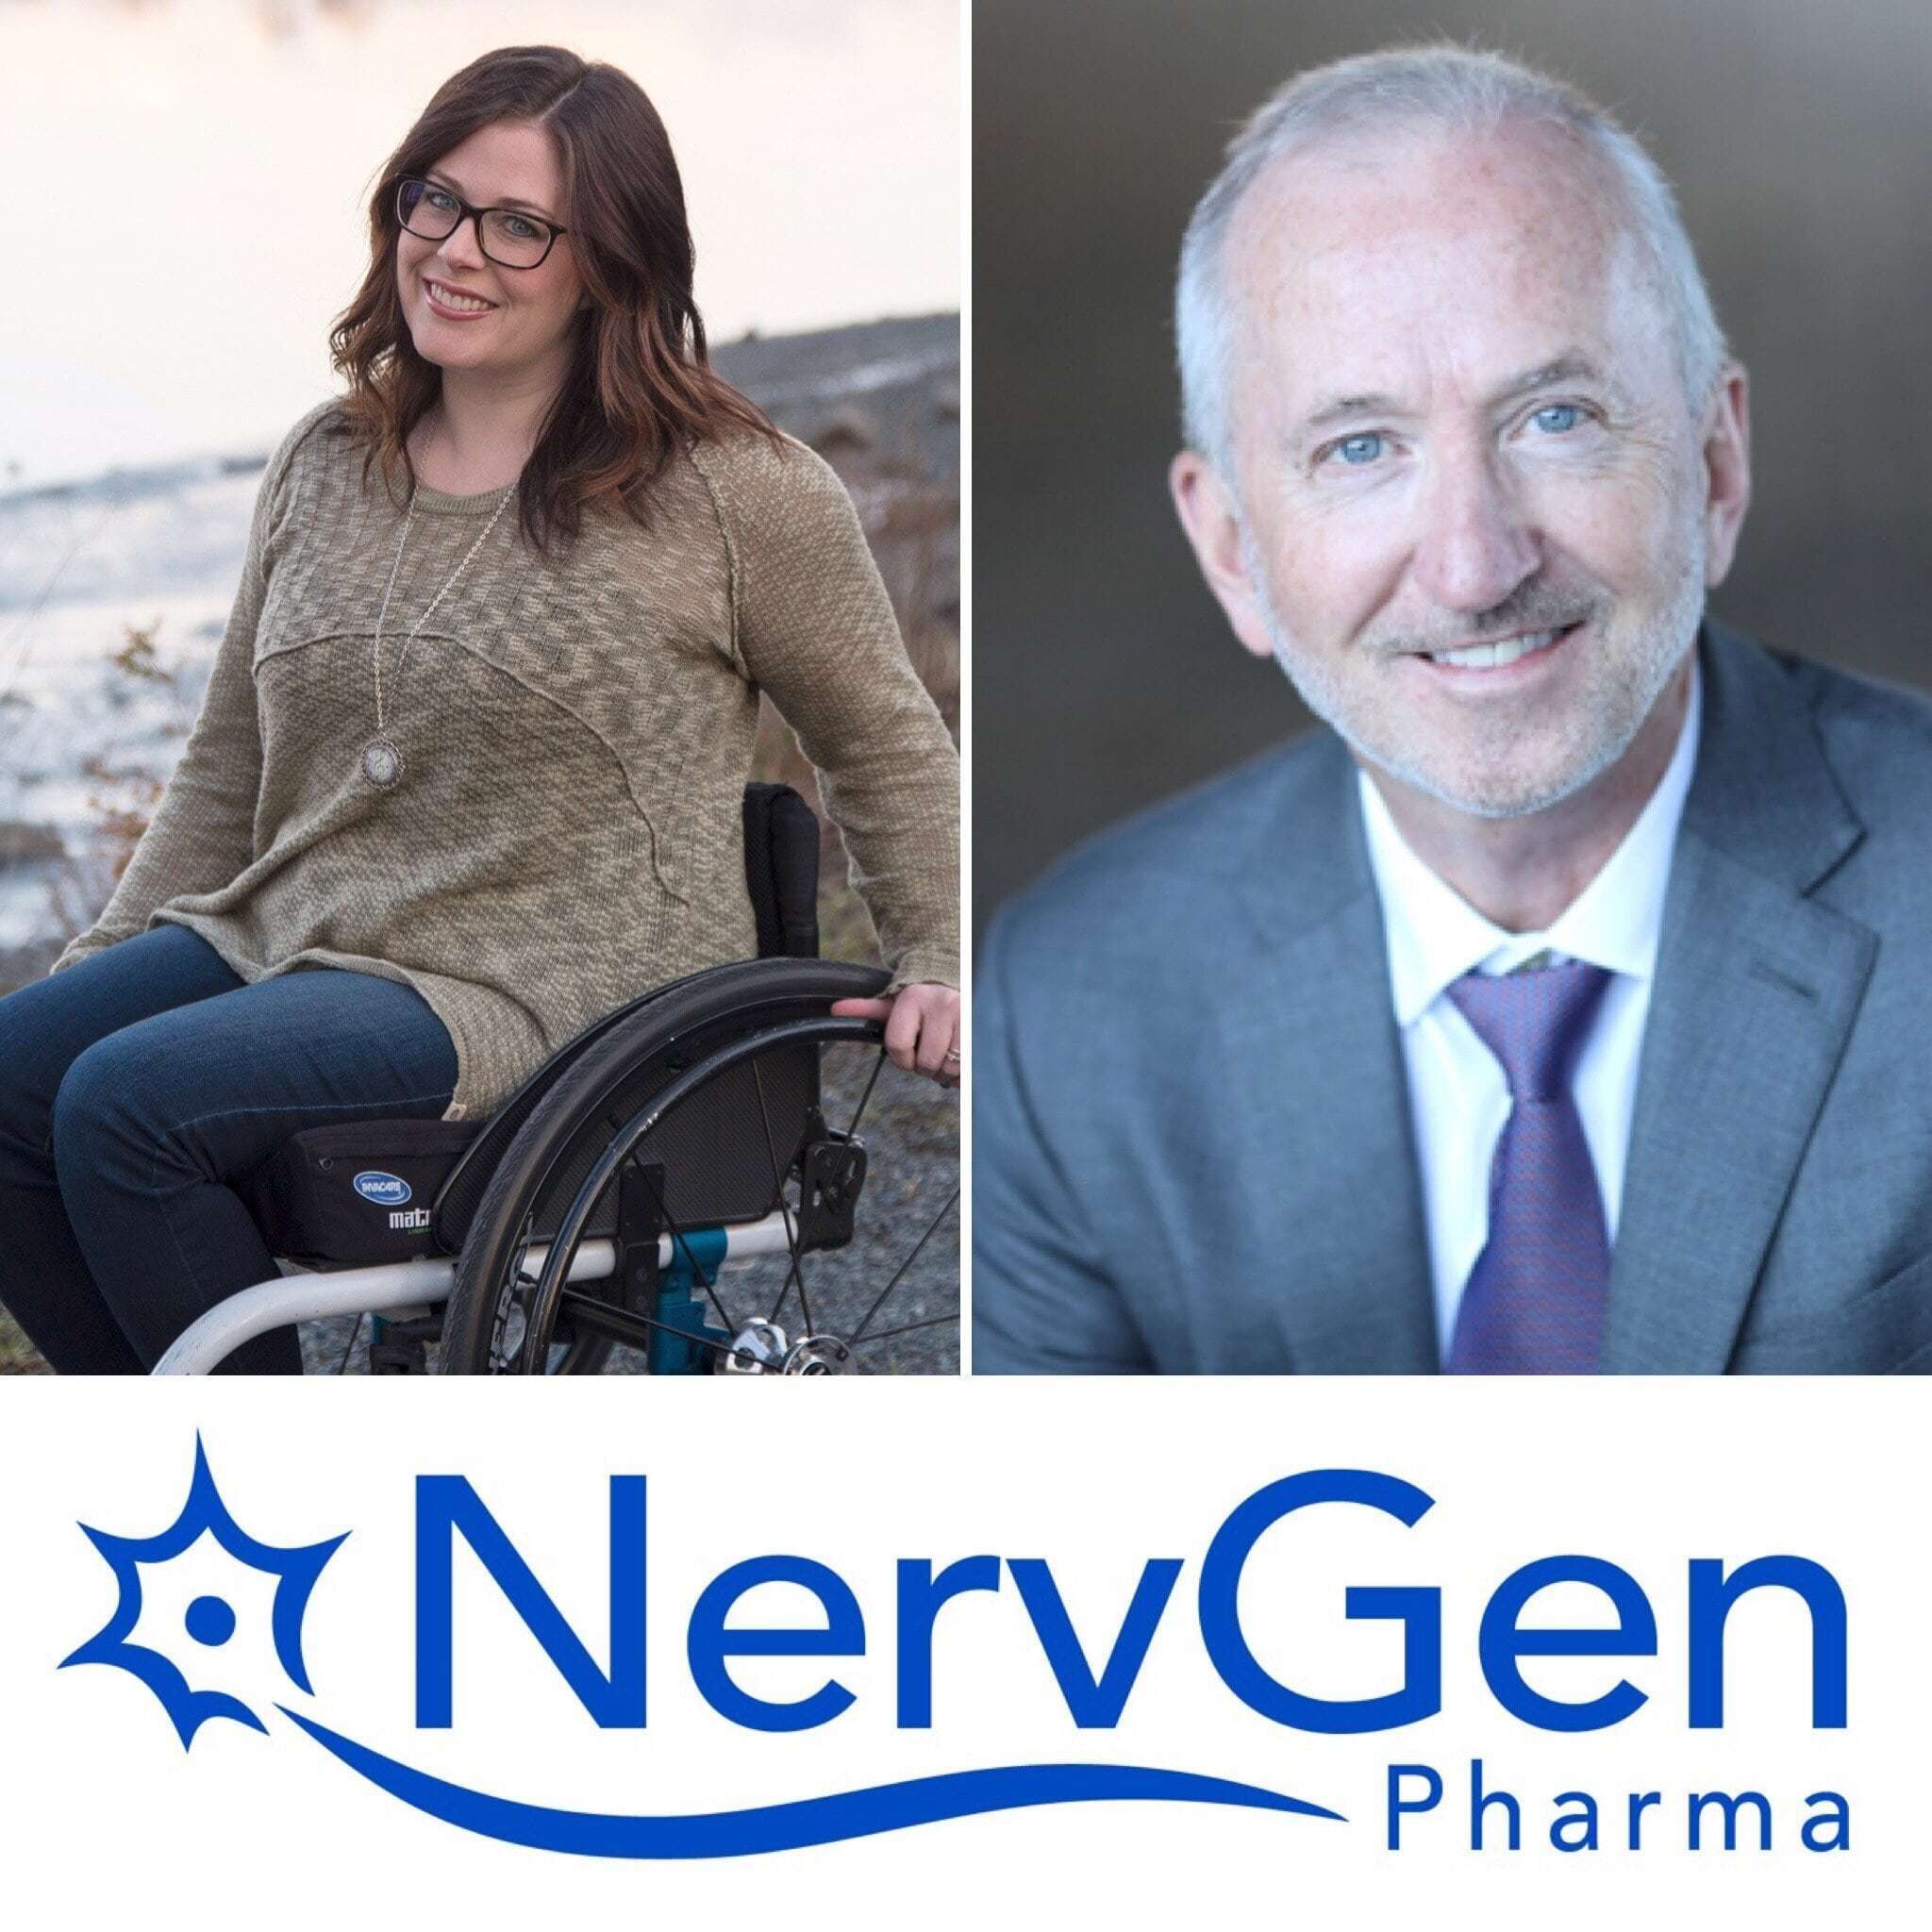 NervGen Clinical Trial Planned, Acute and Chronic: For Company Founder Punnett, It’s Personal